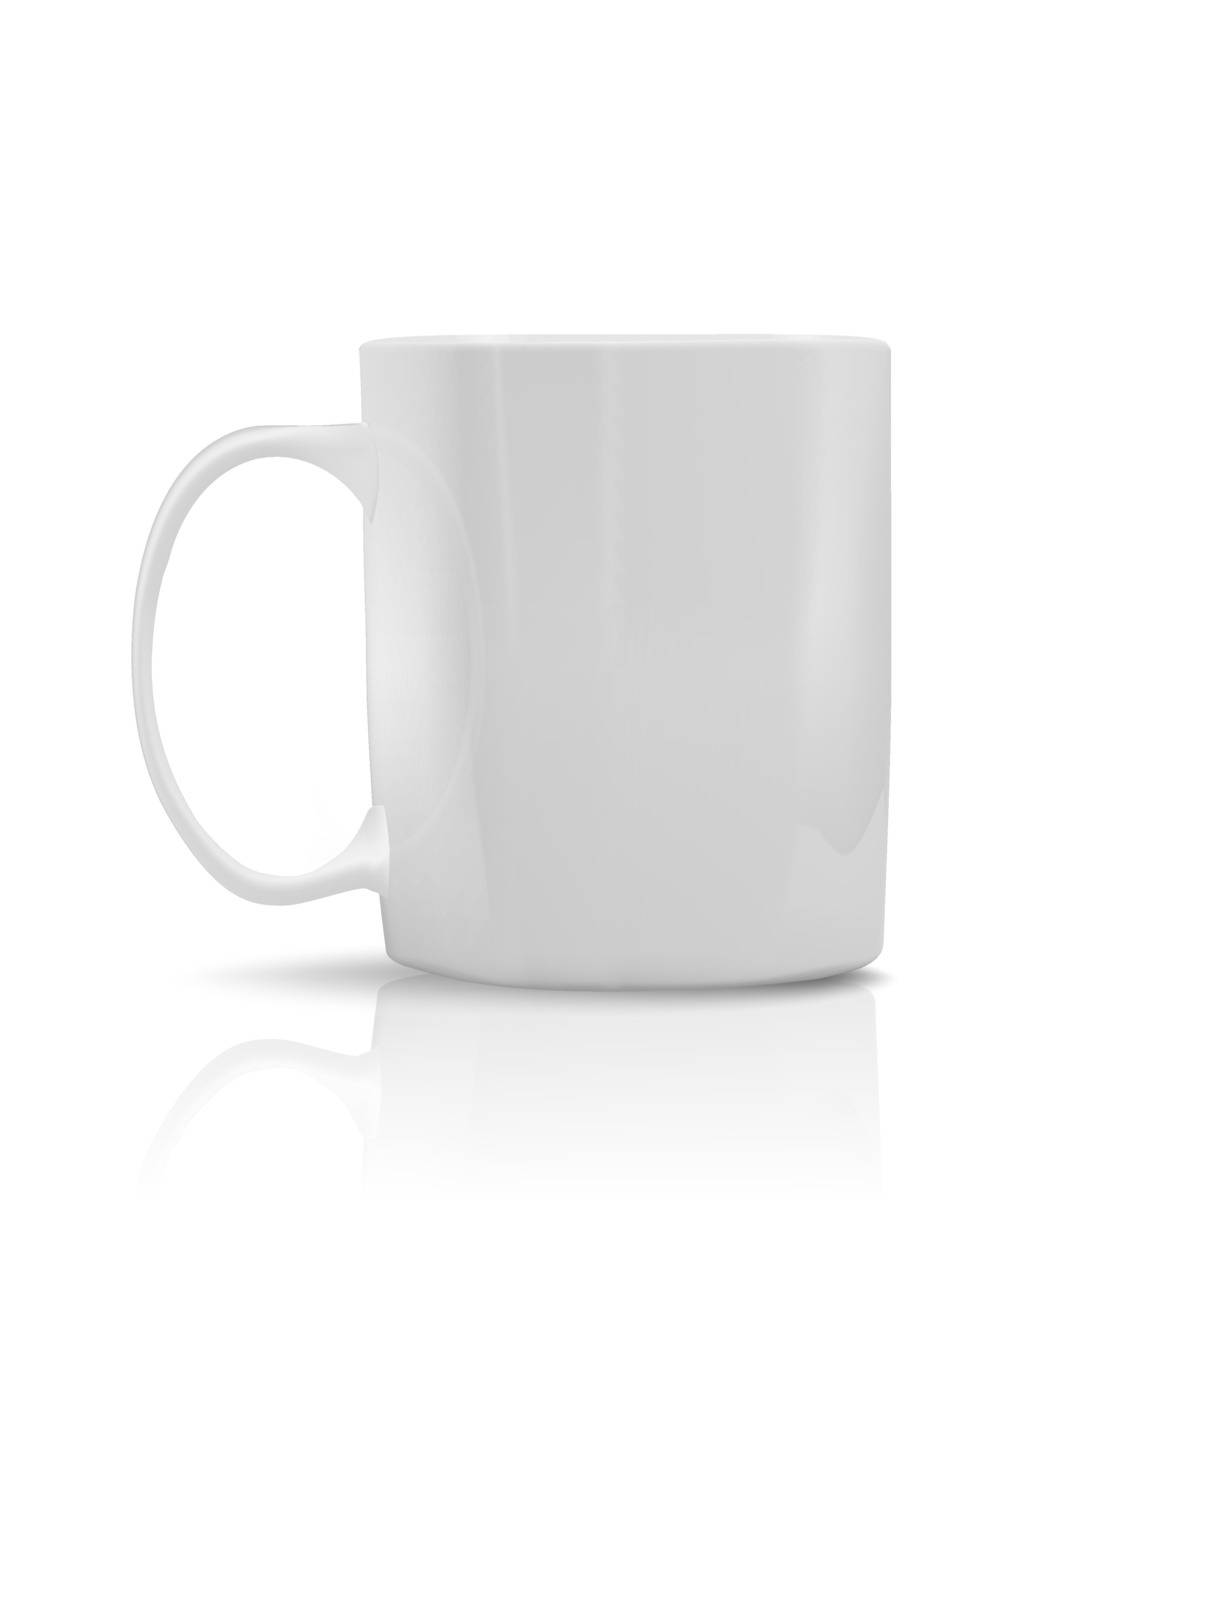 Porcelain Photorealistic White Cup by robuart